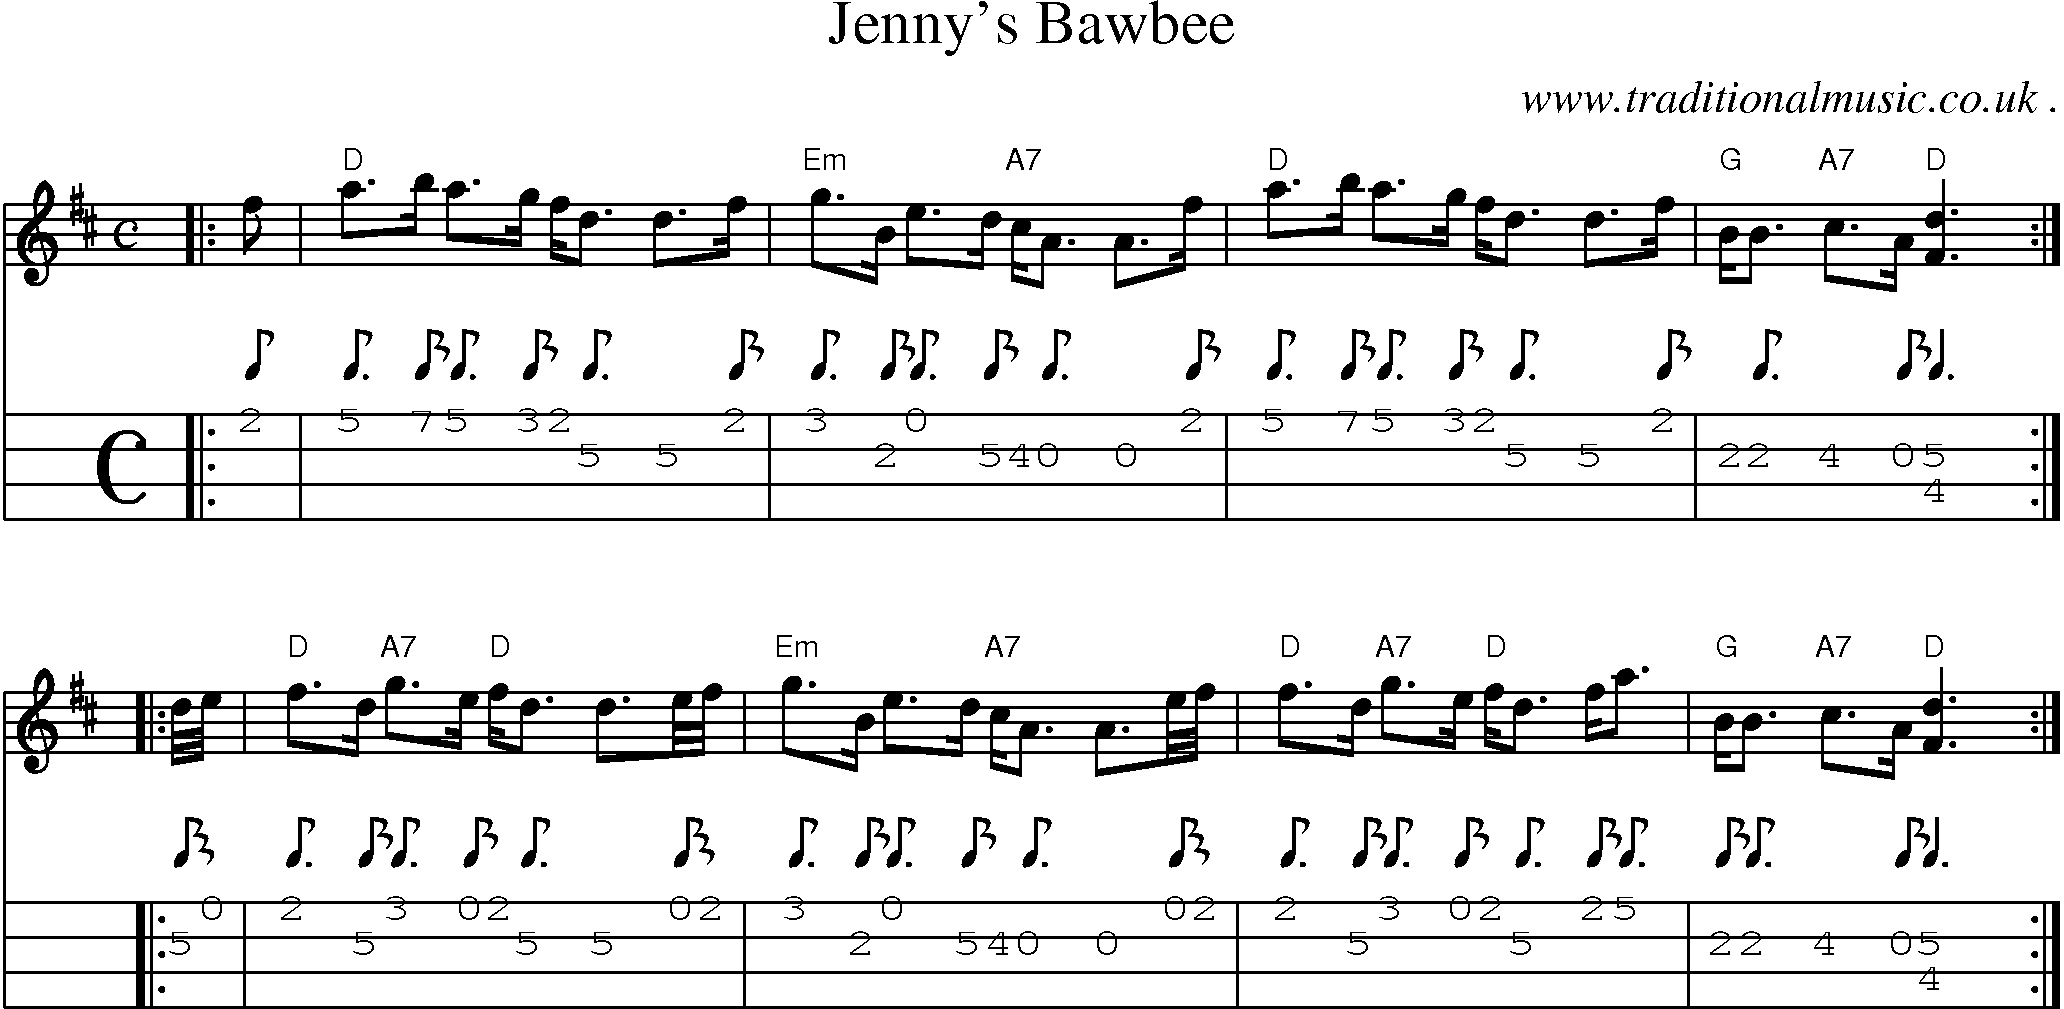 Sheet-music  score, Chords and Mandolin Tabs for Jennys Bawbee